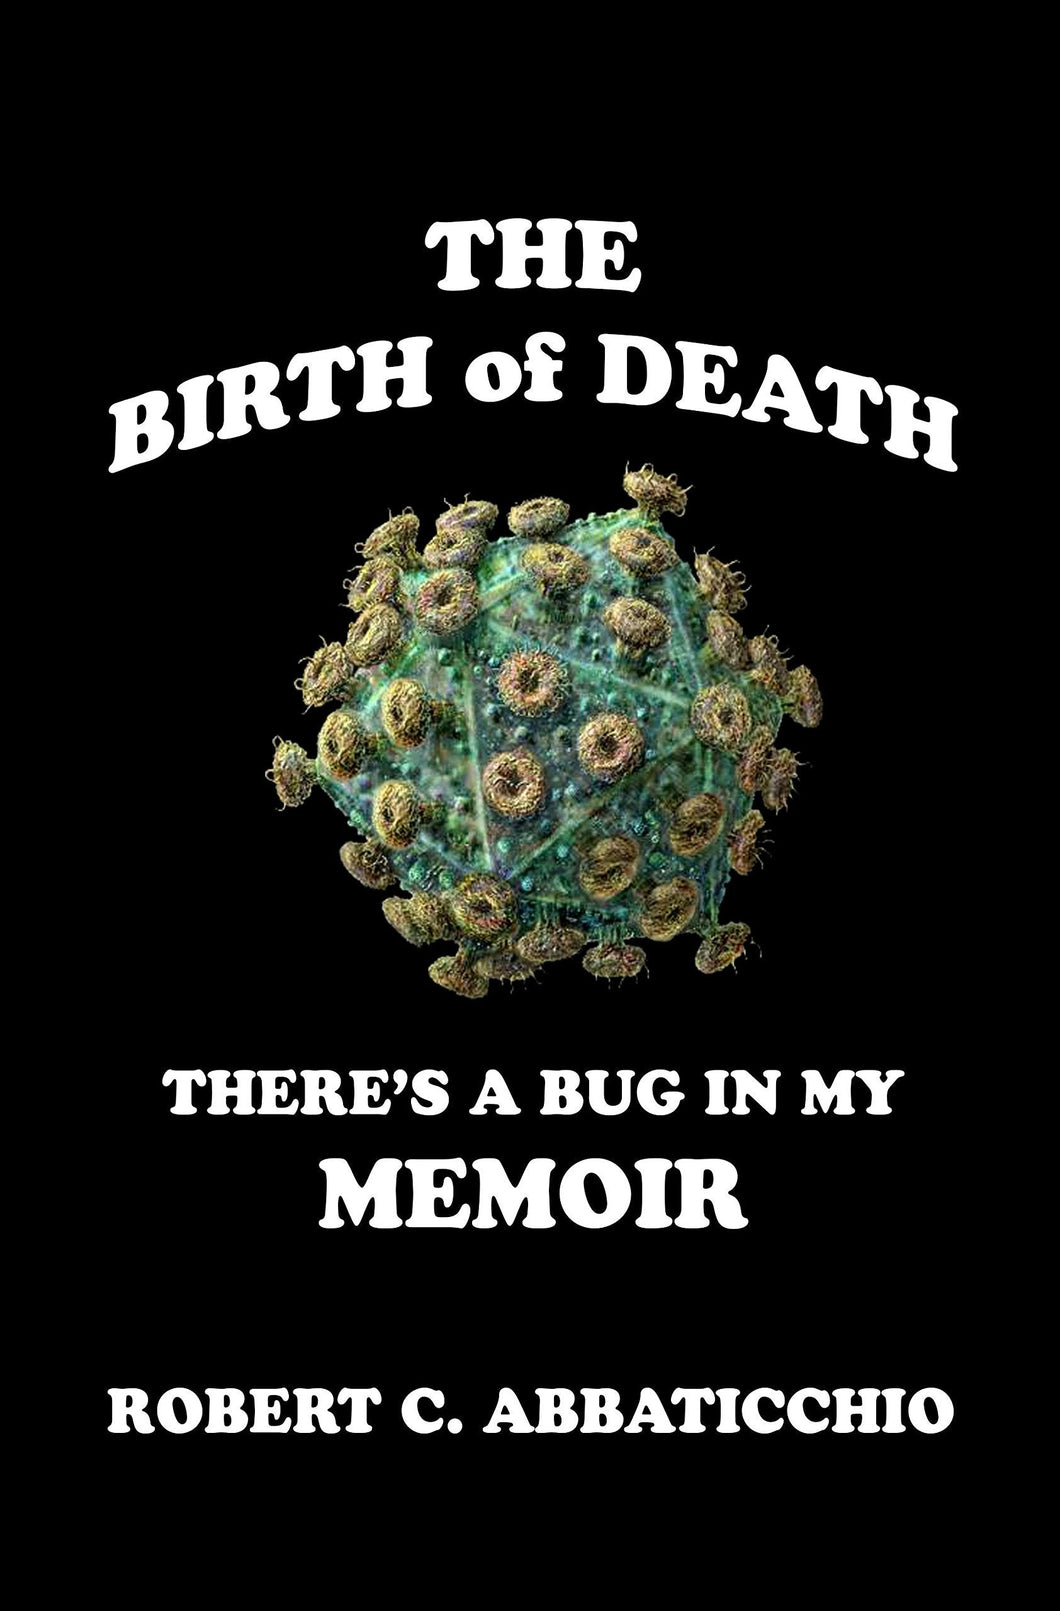 The Birth of Death: There's a Bug in My Memoir - Starry Night Publishing